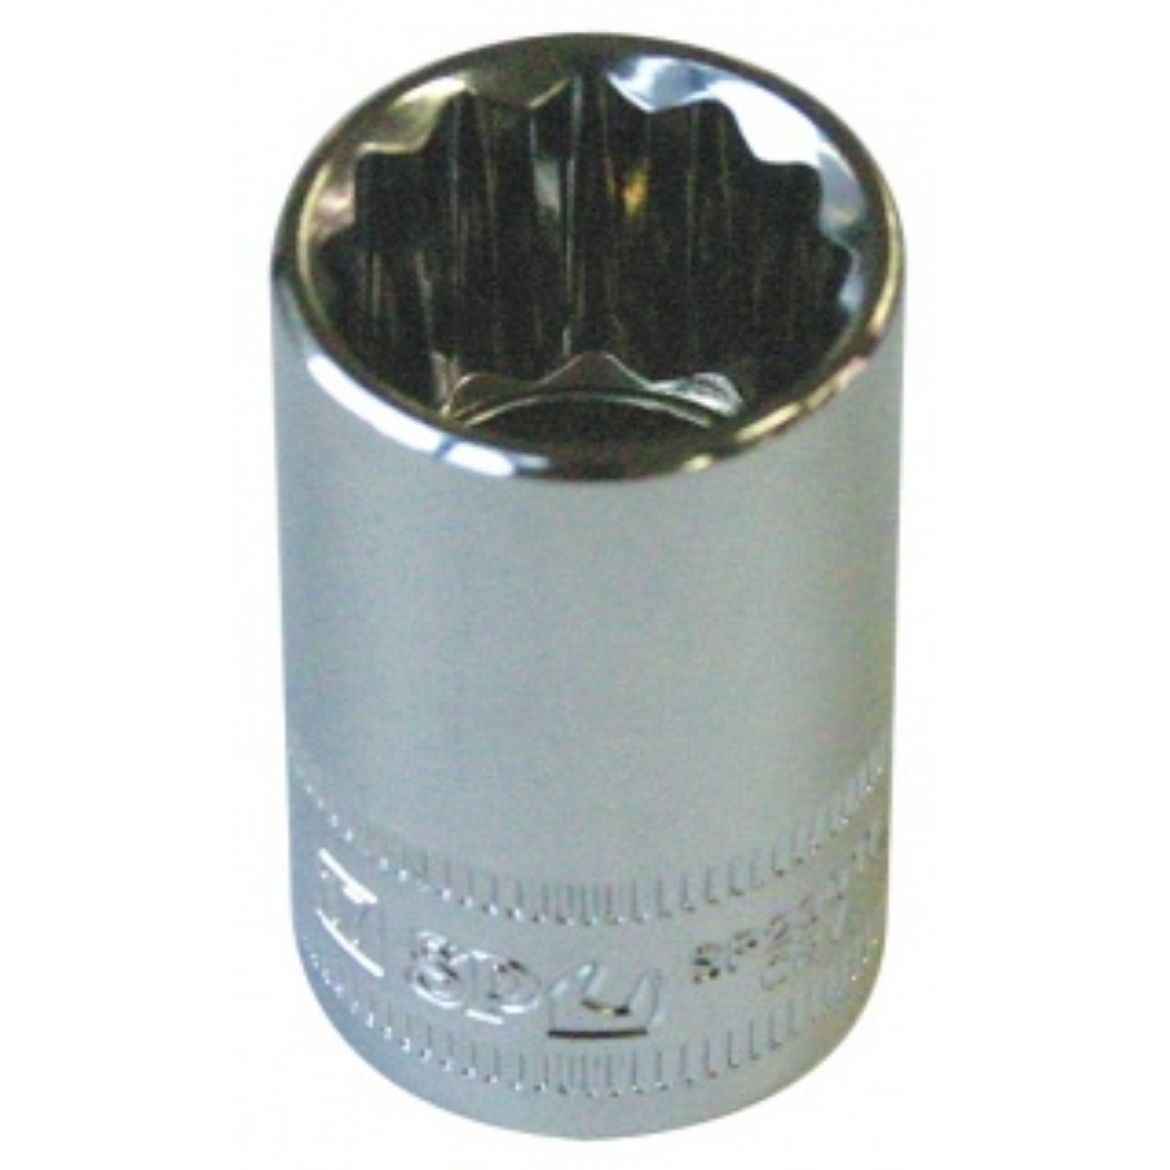 Picture of SOCKET 1/2"DR 12PT METRIC 19MM SP TOOLS